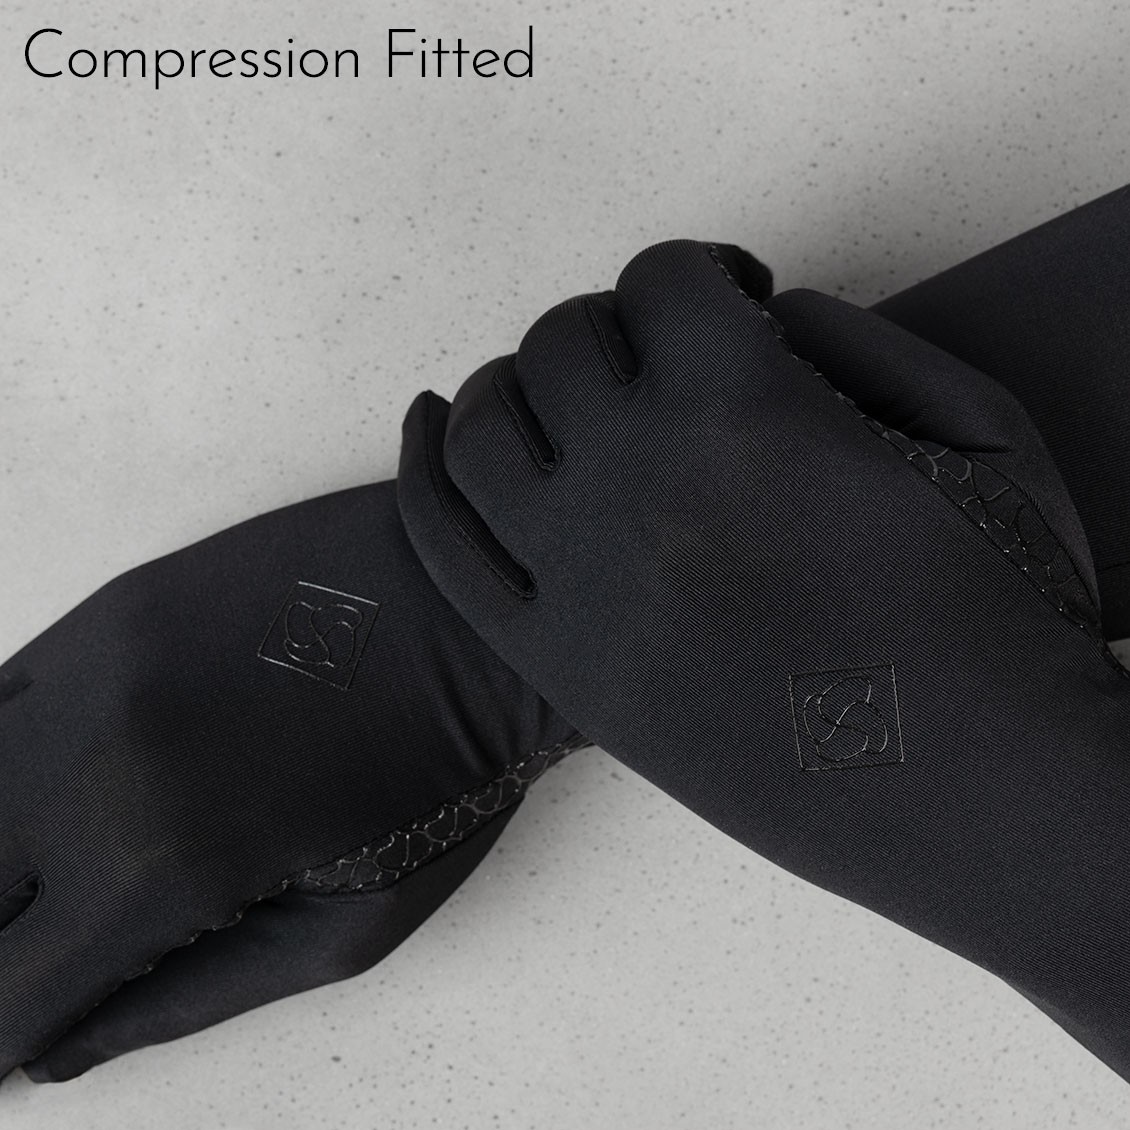 Sunnah Style Esteem Signature Gloves v2 Forearm Length Compression Fitted